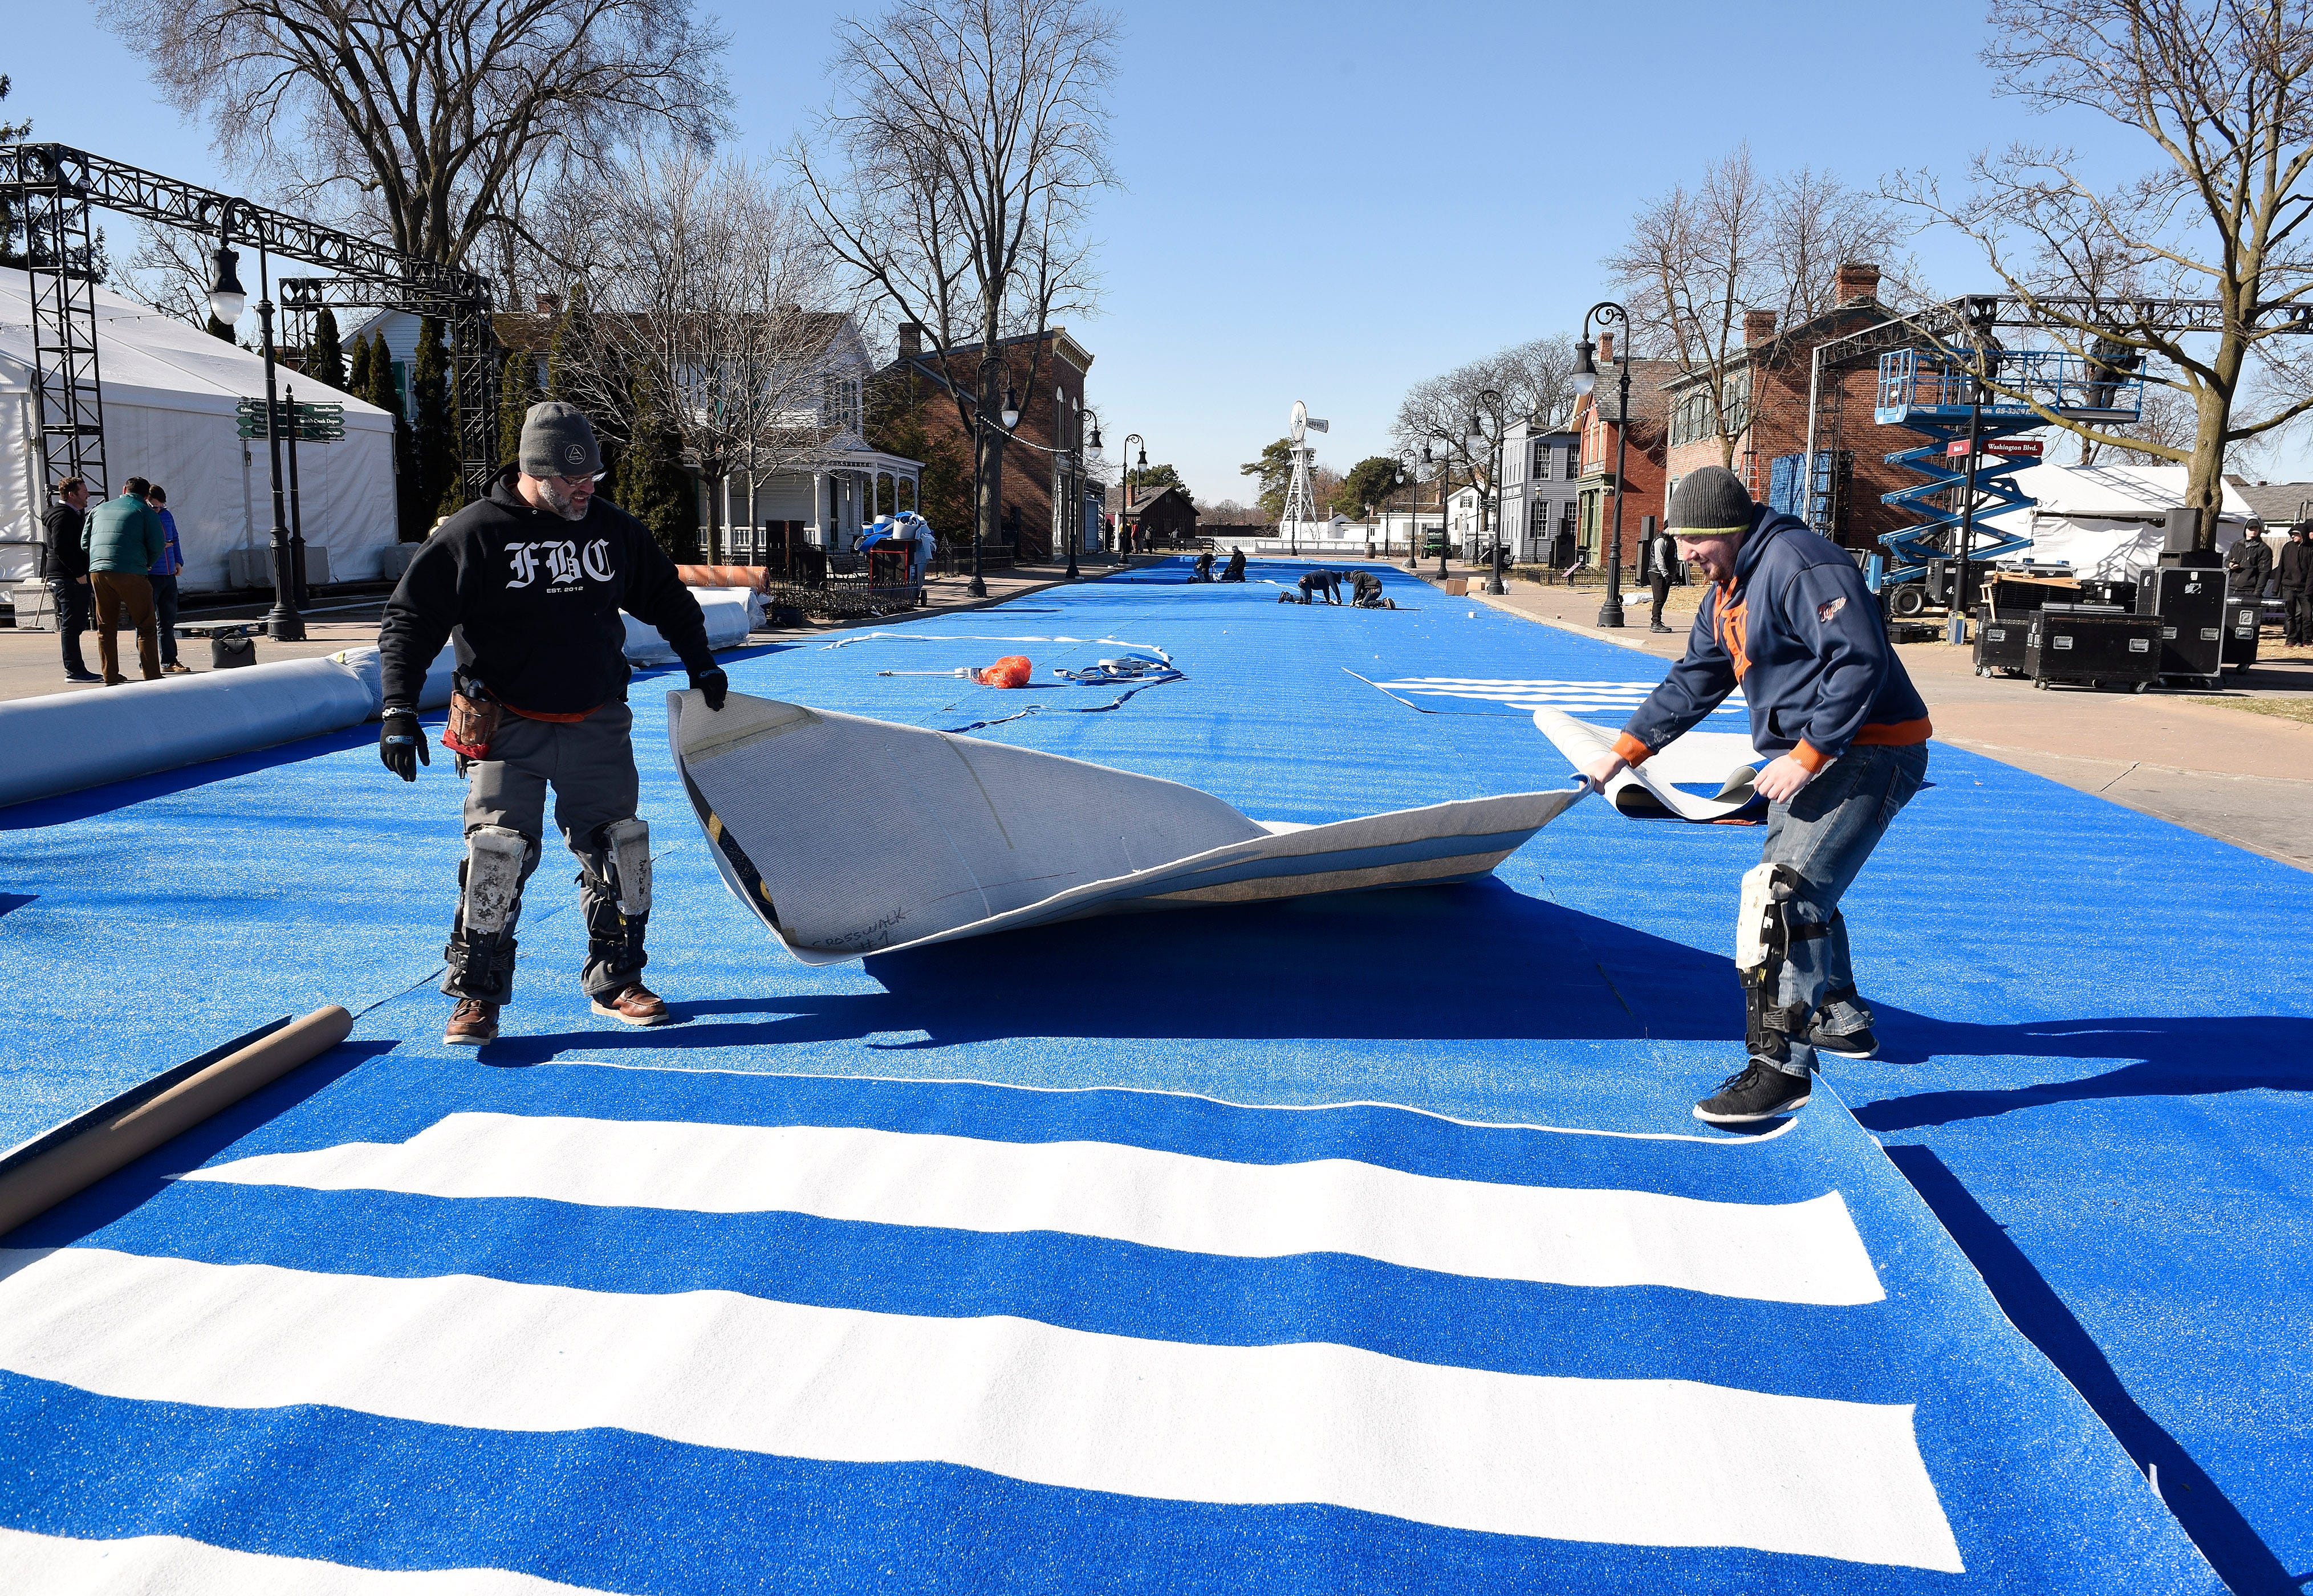 Days before the event,  Matt Rattray, left,  and Andy Barker of D.E. McNabb Flooring Co. were among the crew that installed carpeting at Greenfield Village in Dearborn, where Ford Motor Co. created "Escapeville" to unveil its brand new Escape global crossover vehicle.